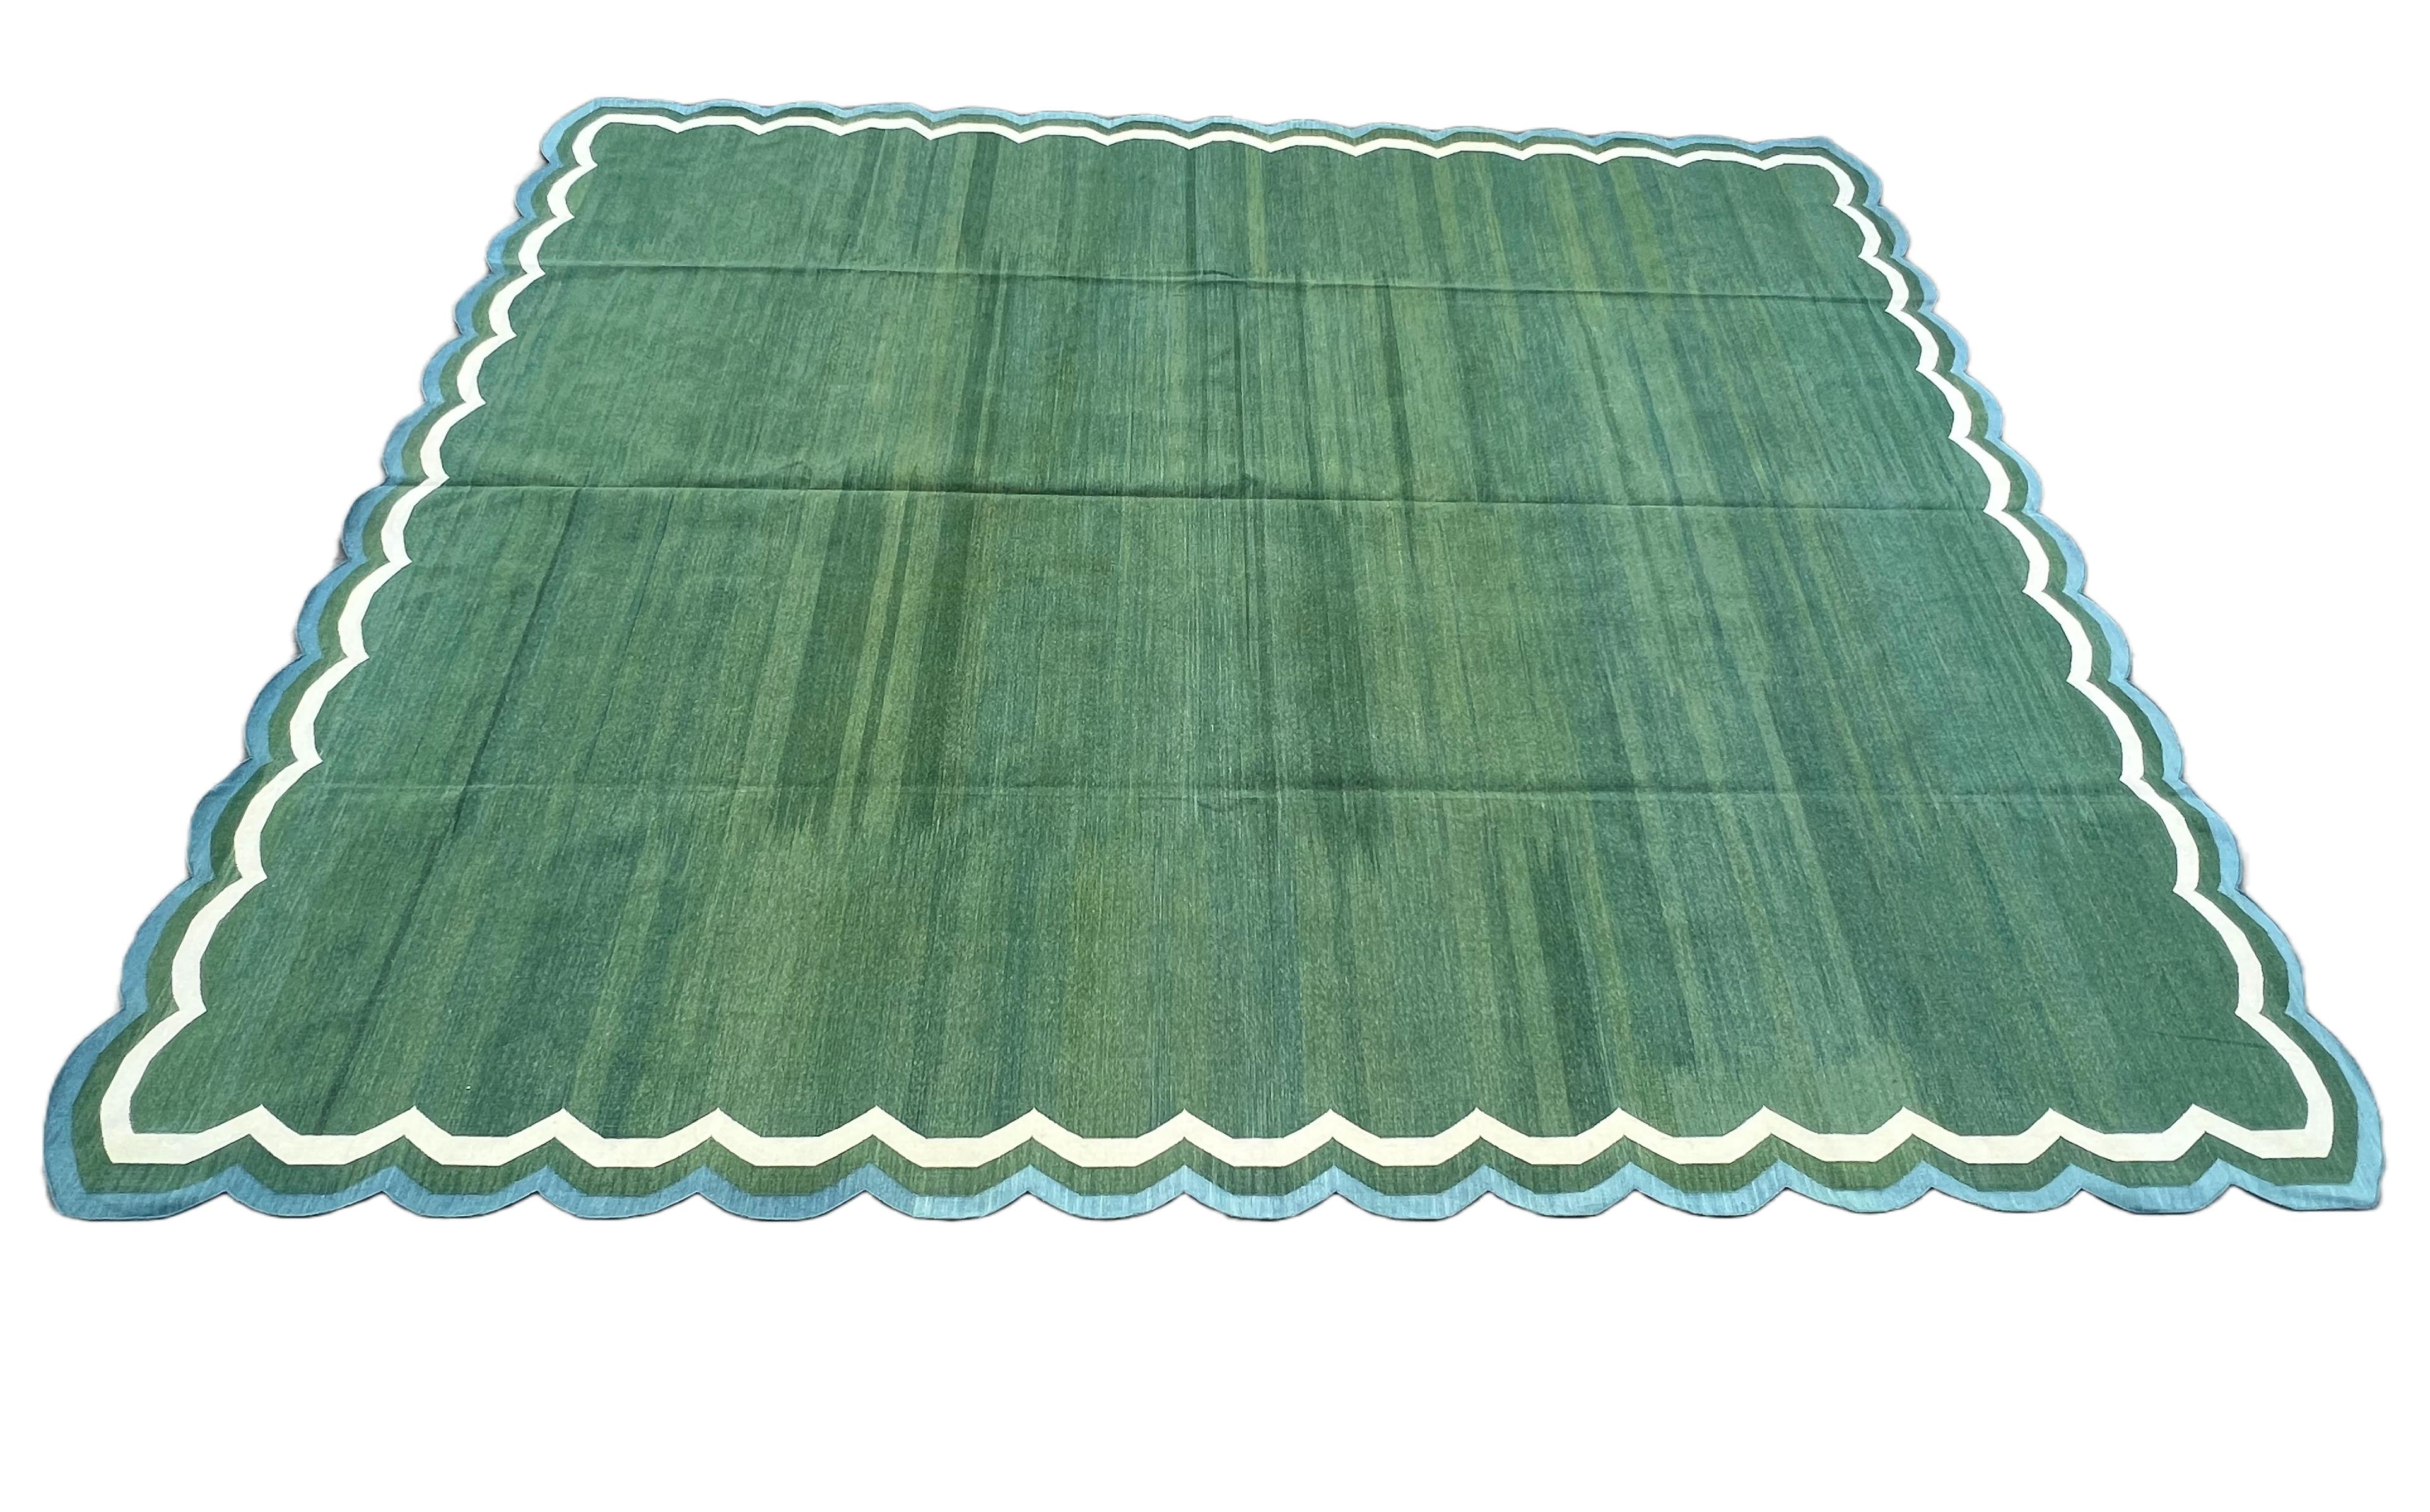 Mid-Century Modern Handmade Cotton Area Flat Weave Rug, 12x15 Green And Blue Scallop Stripe Dhurrie For Sale